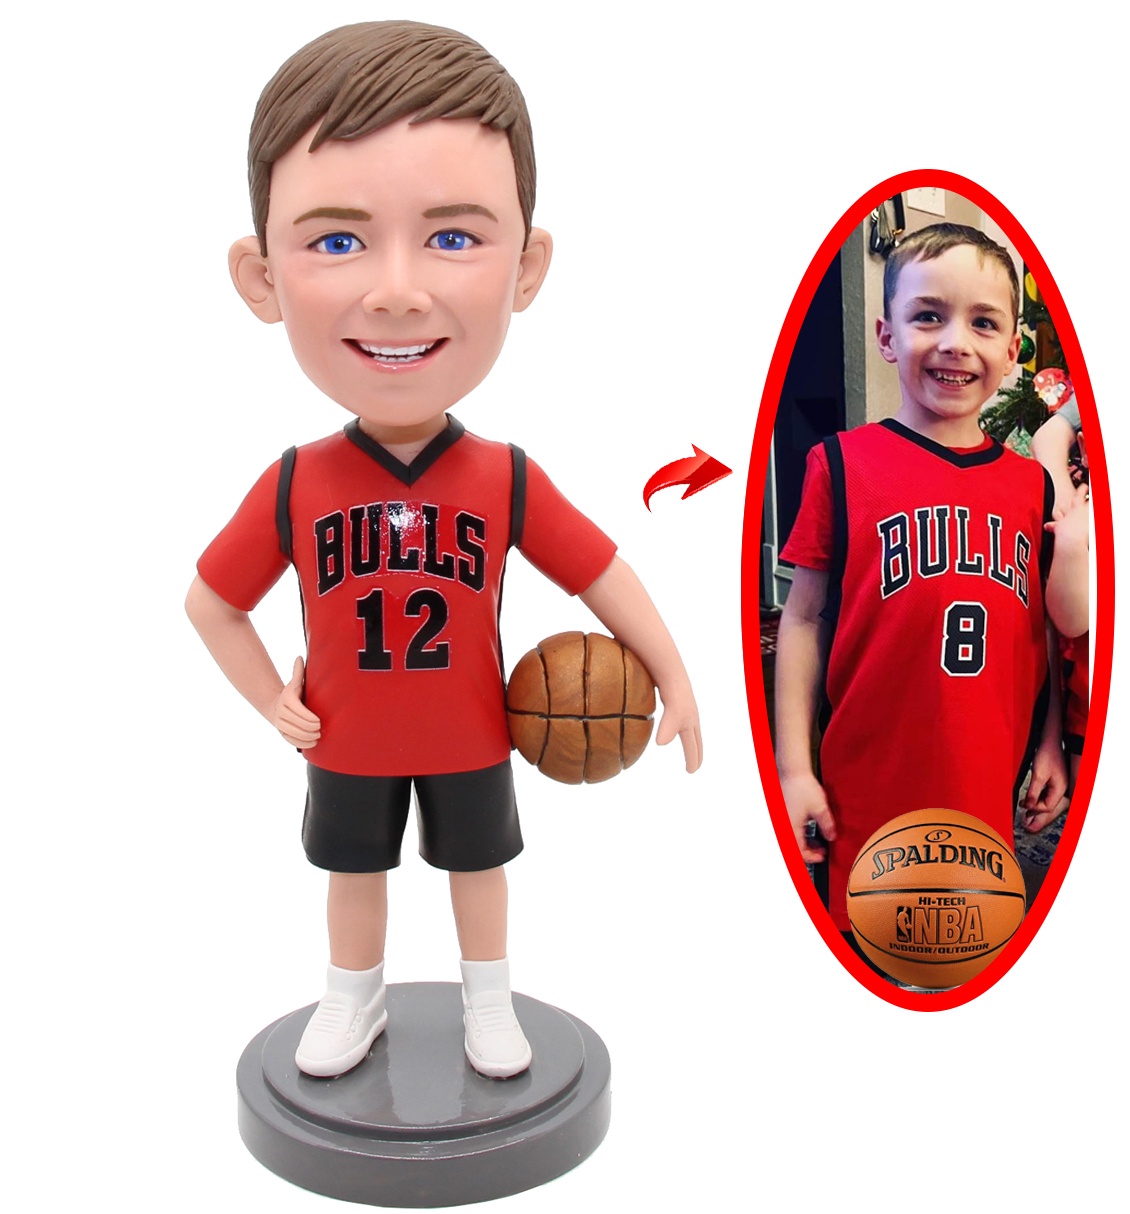 Custom Bobbleheads: The Perfect Gift for Any Occasion